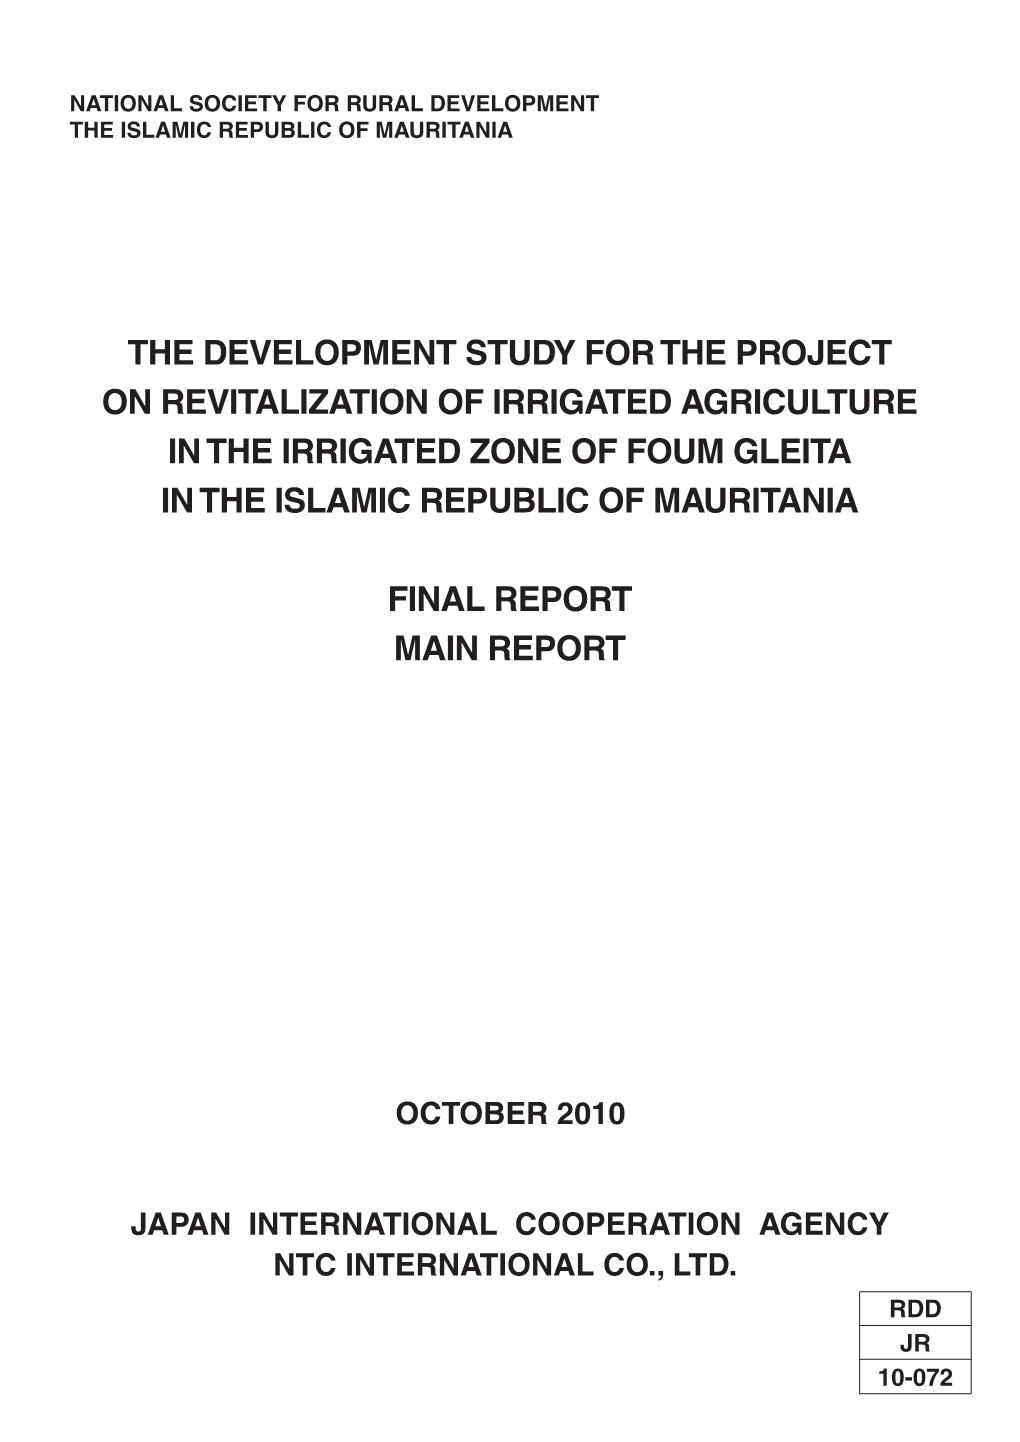 The Development Study for the Project on Revitalization of Irrigated Agriculture in the Irrigated Zone of Foum Gleita in the Islamic Republic of Mauritania